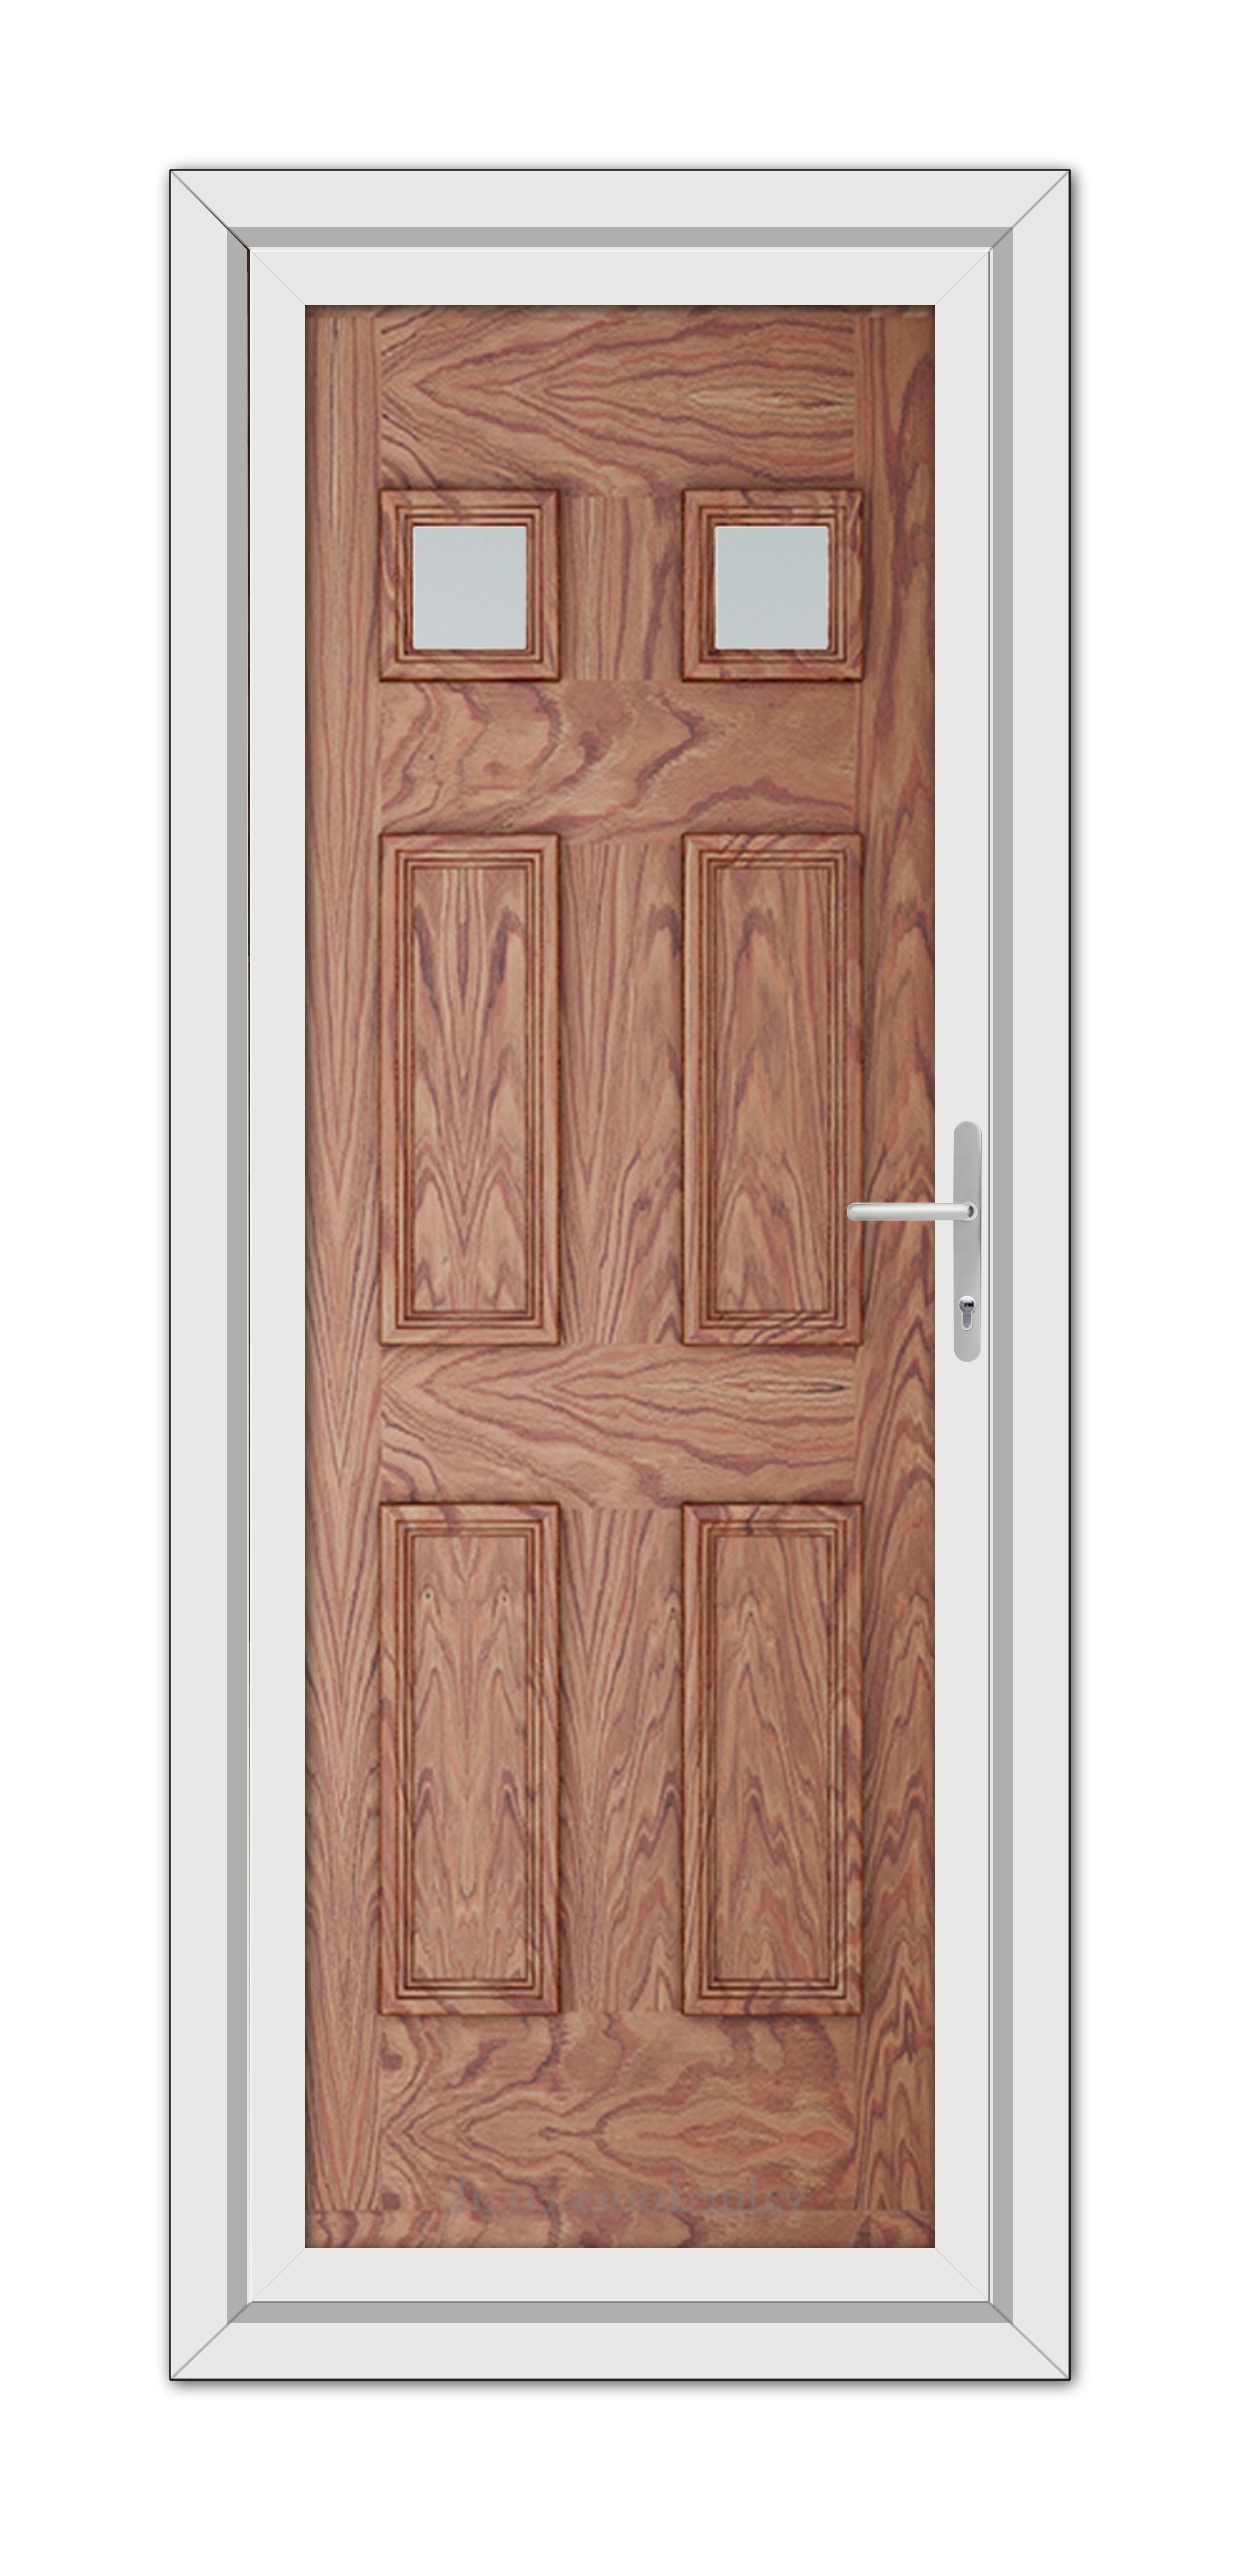 A Solid Oak Windsor uPVC Door with two small square windows near the top and a metal handle, set within a white frame.